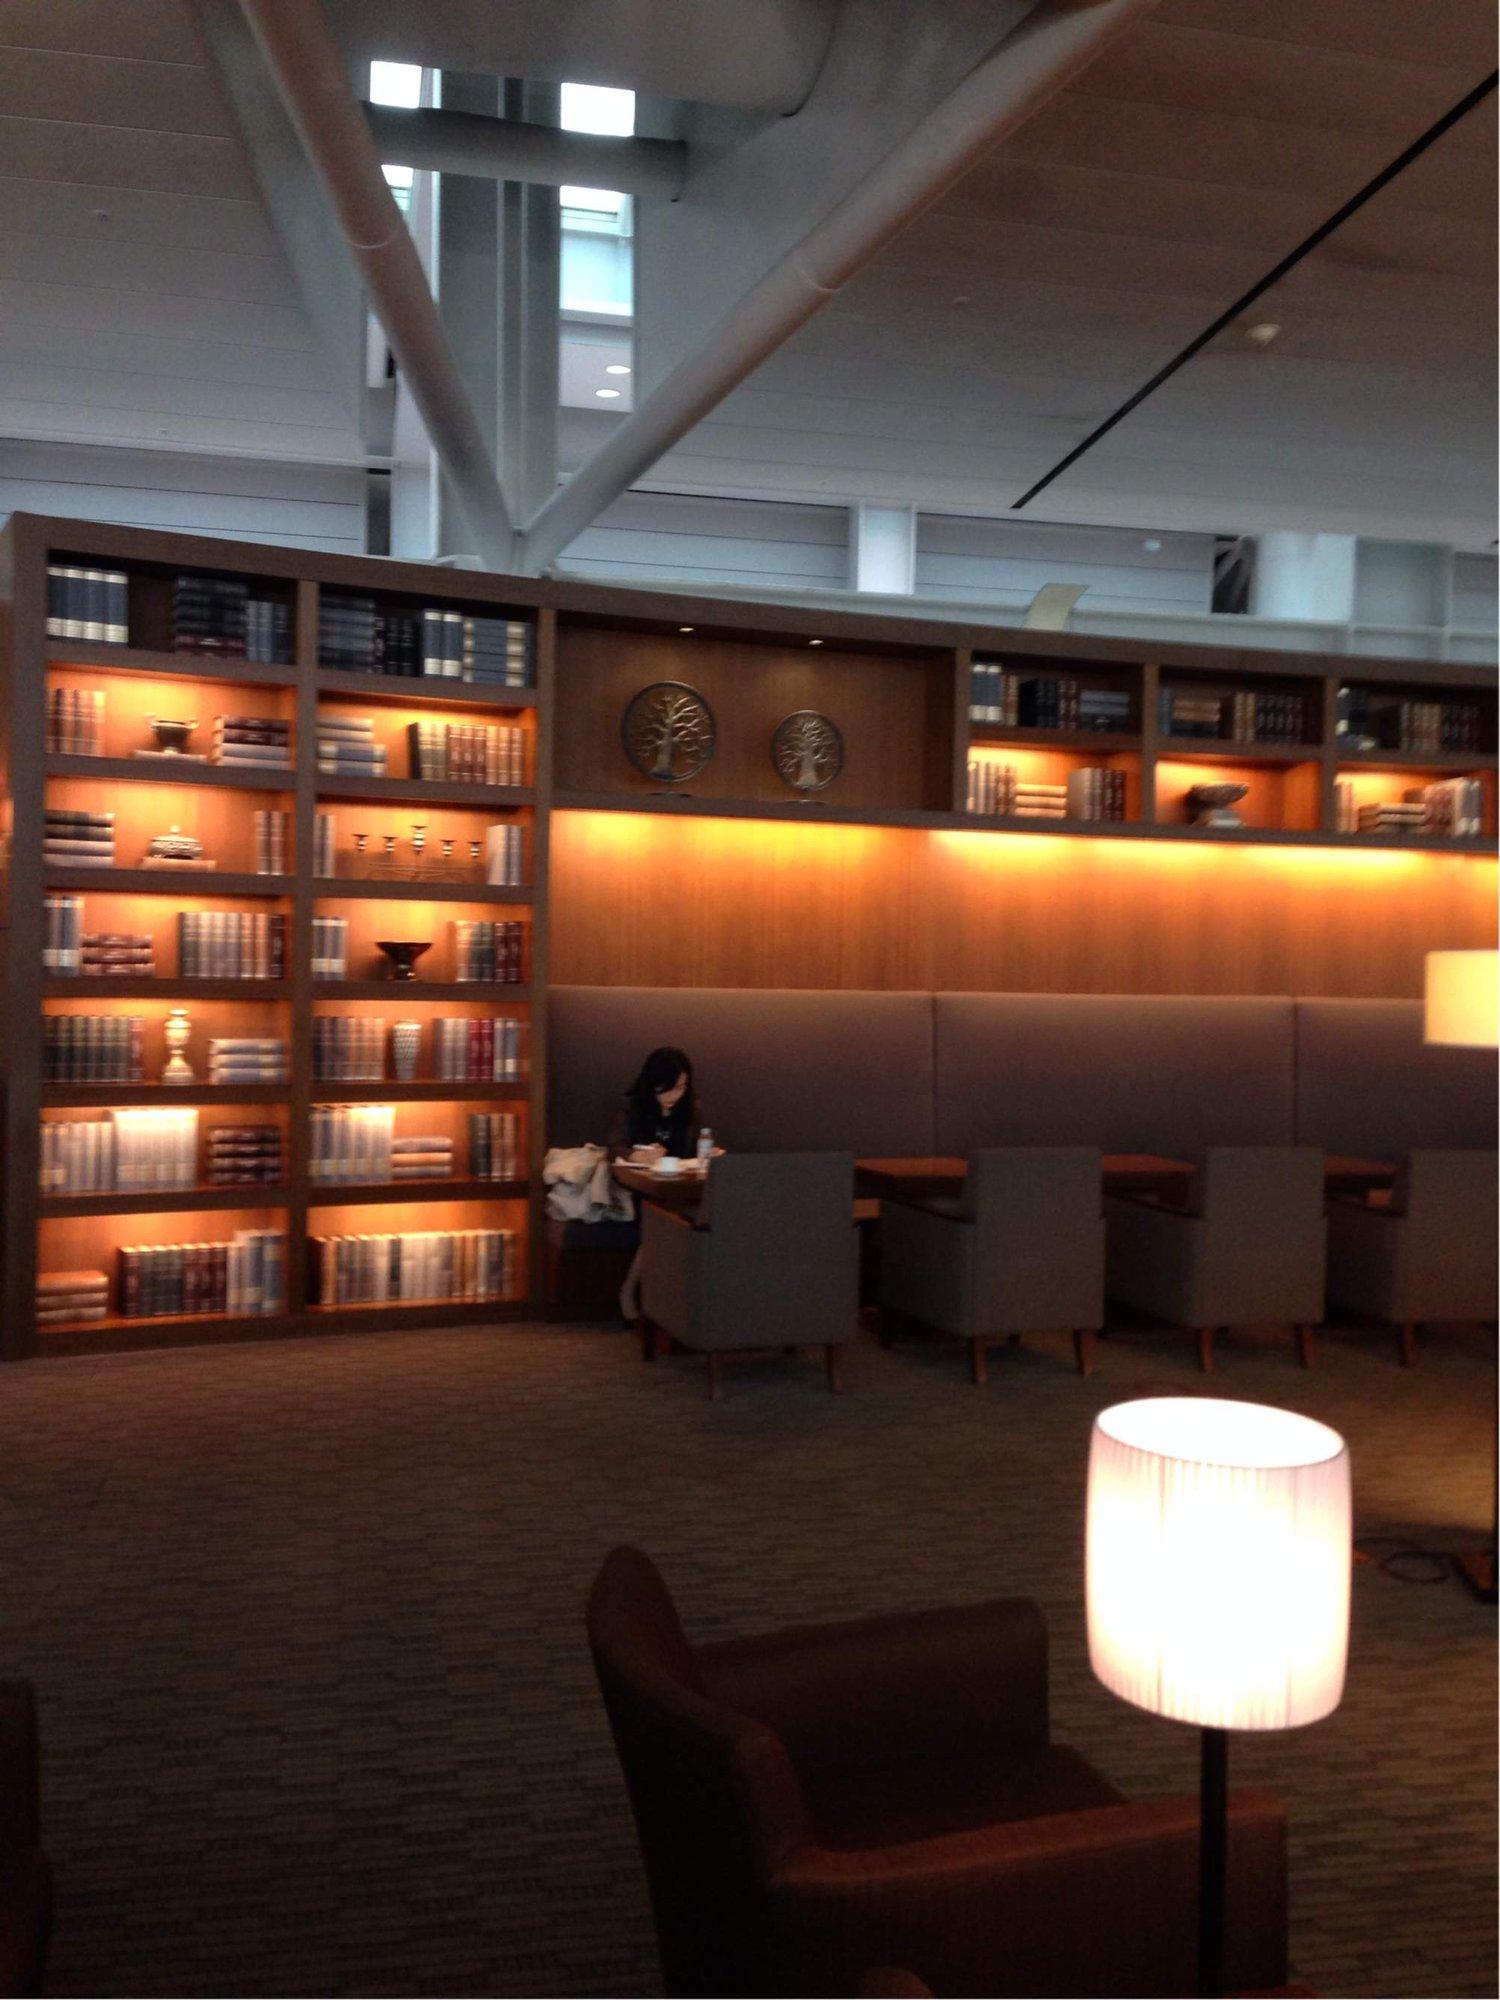 Asiana Airlines Business Class Lounge (East) image 20 of 59